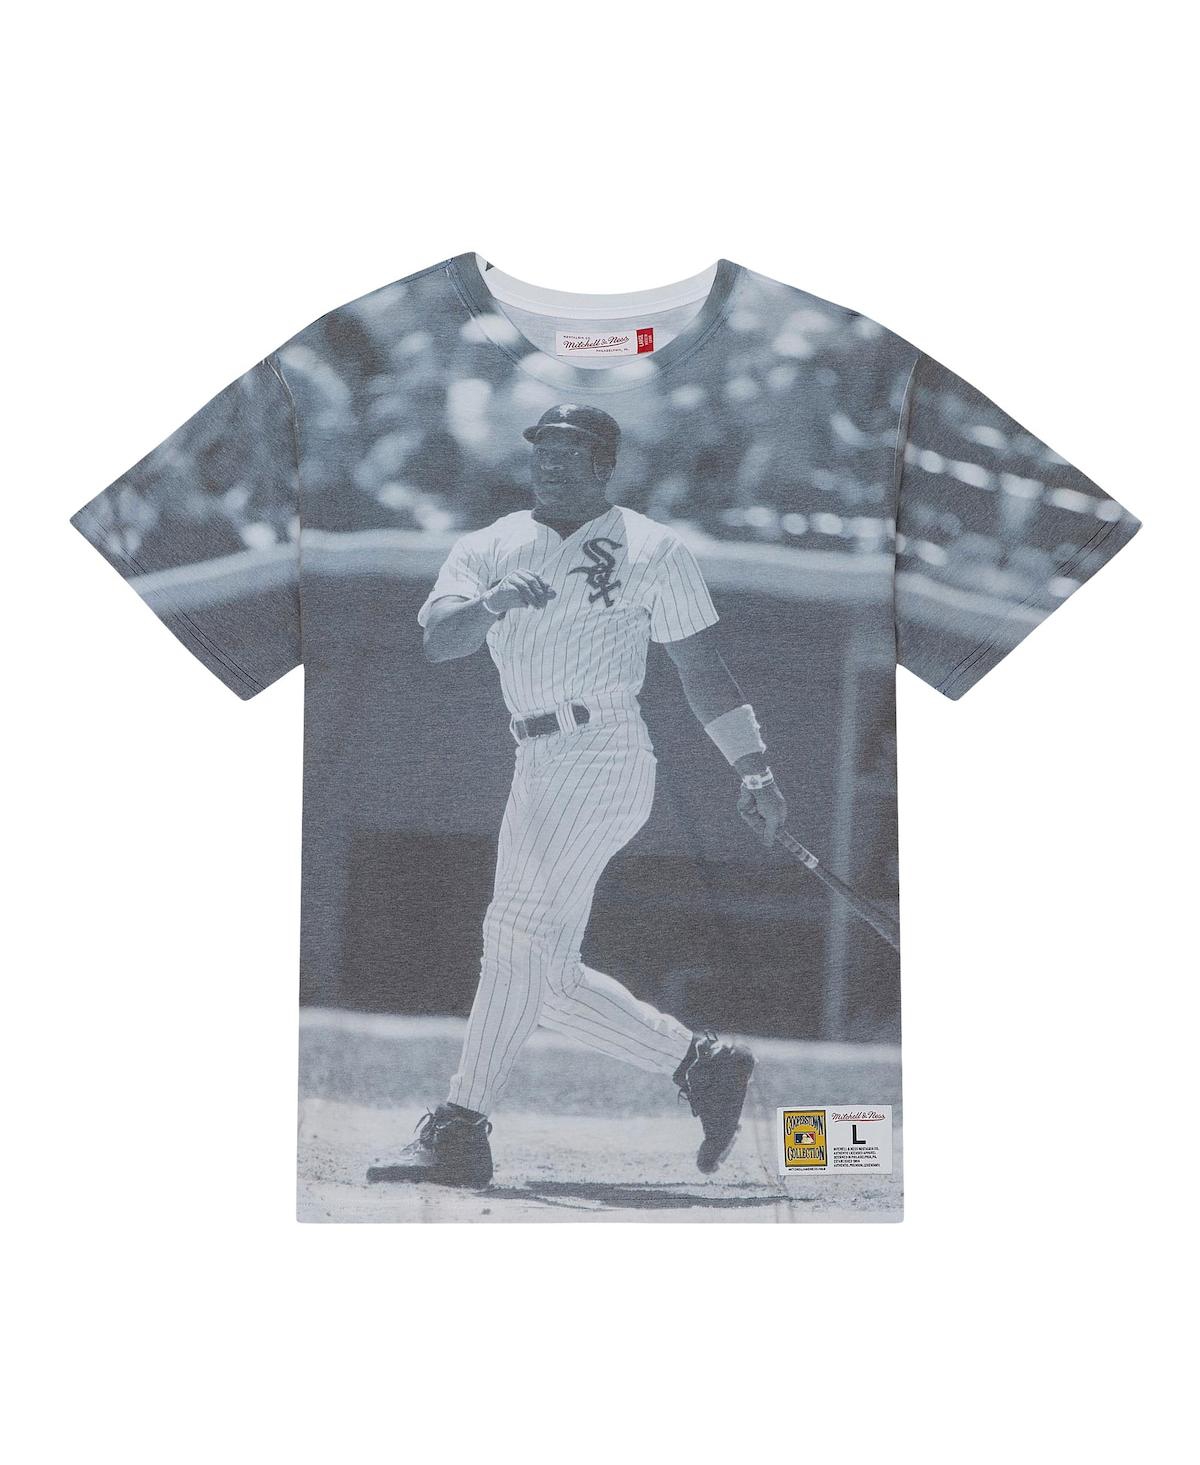 Shop Mitchell & Ness Men's  Bo Jackson Chicago White Sox Cooperstown Collection Highlight Sublimated Playe